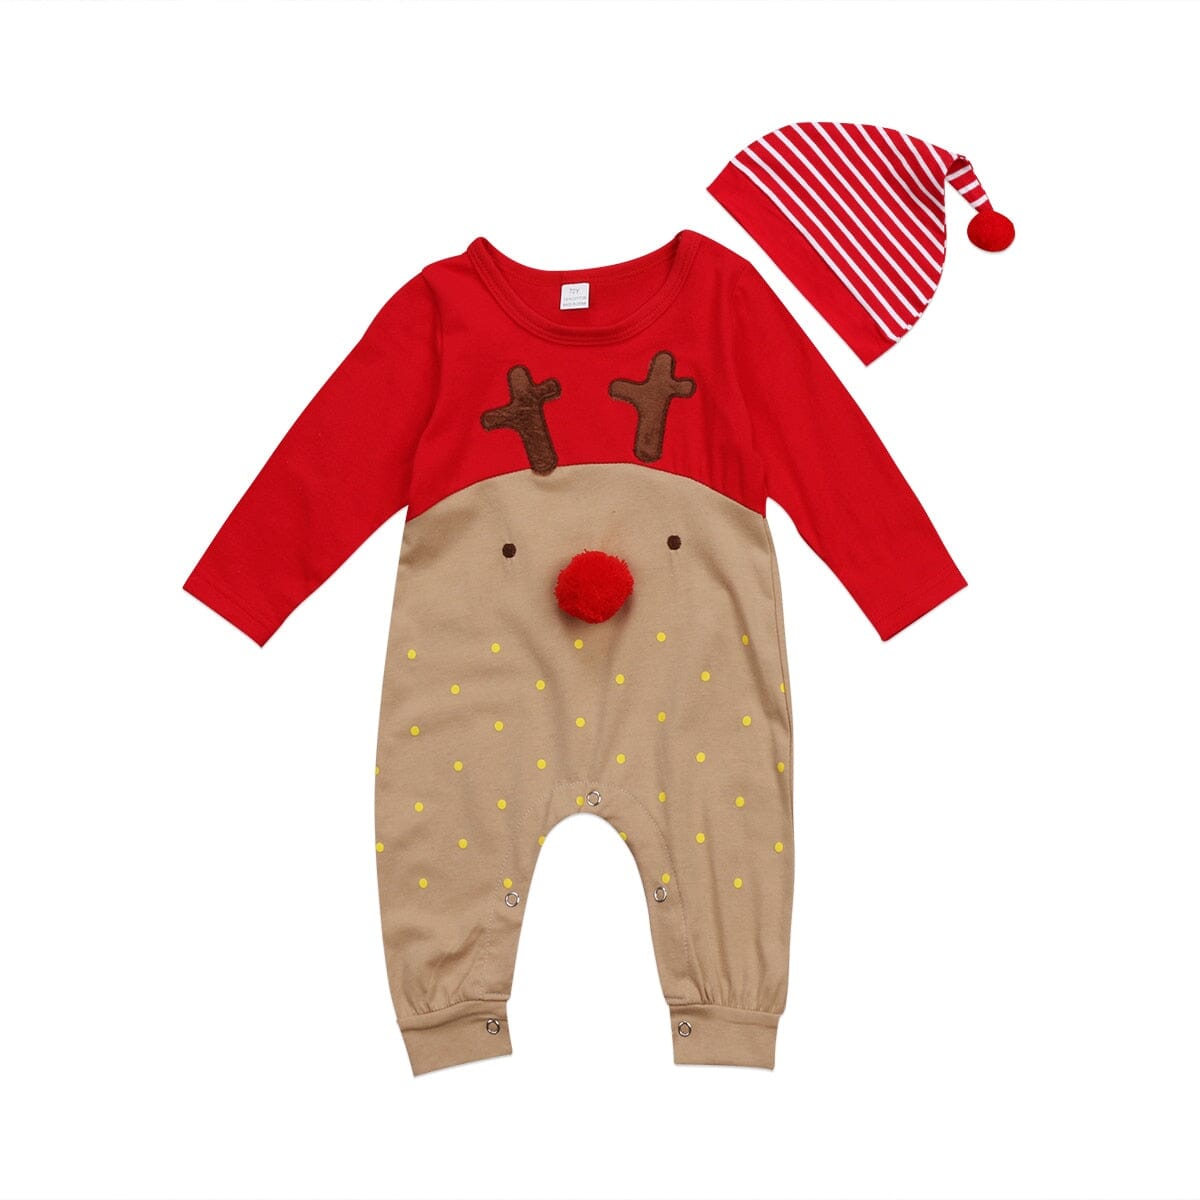 Newborn Baby Boys Girl Christmas Rompers Long Sleeve Deer Romper Jumpsuit+Hat 2Pcs set Sleepwear Party Costume Baby Clothes 0 Baby Bubble Store 1 6M 